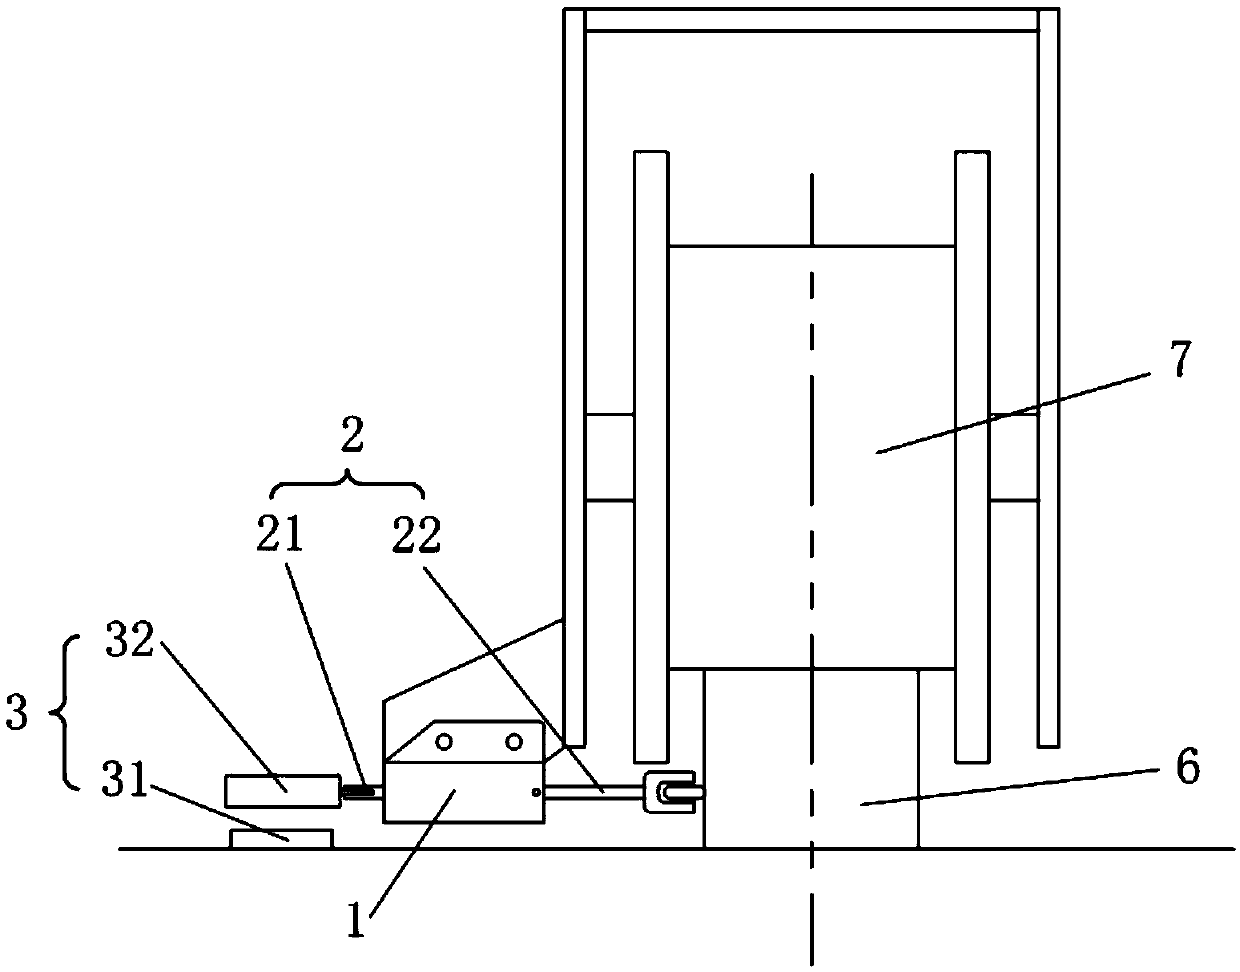 Sensor connecting assembly and track transportation system